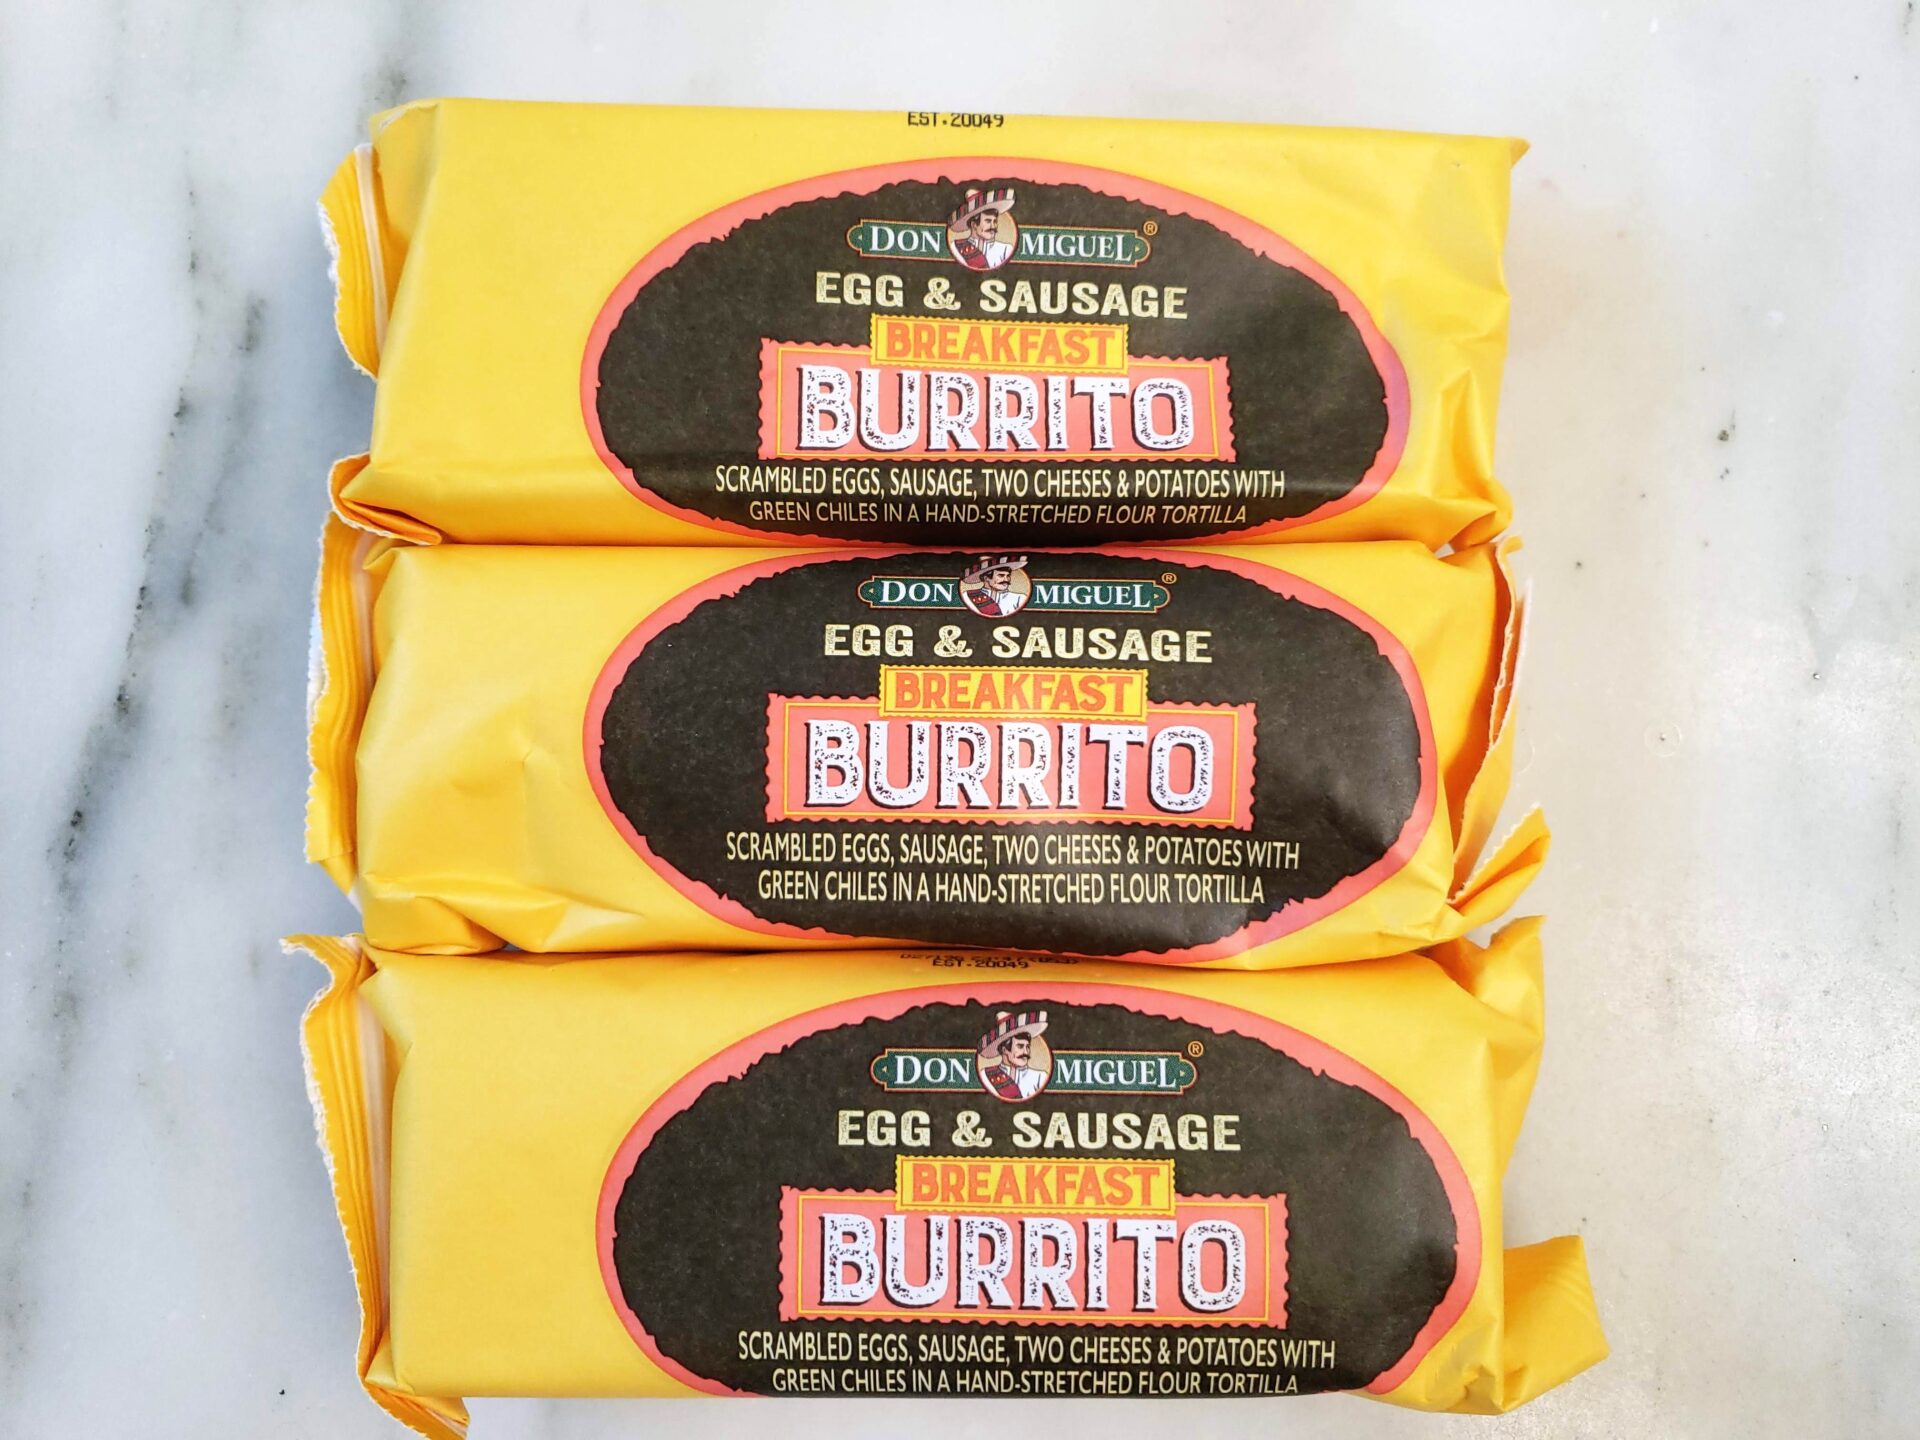 Pack-of-DOn-miguel-Breakfast-Burritos